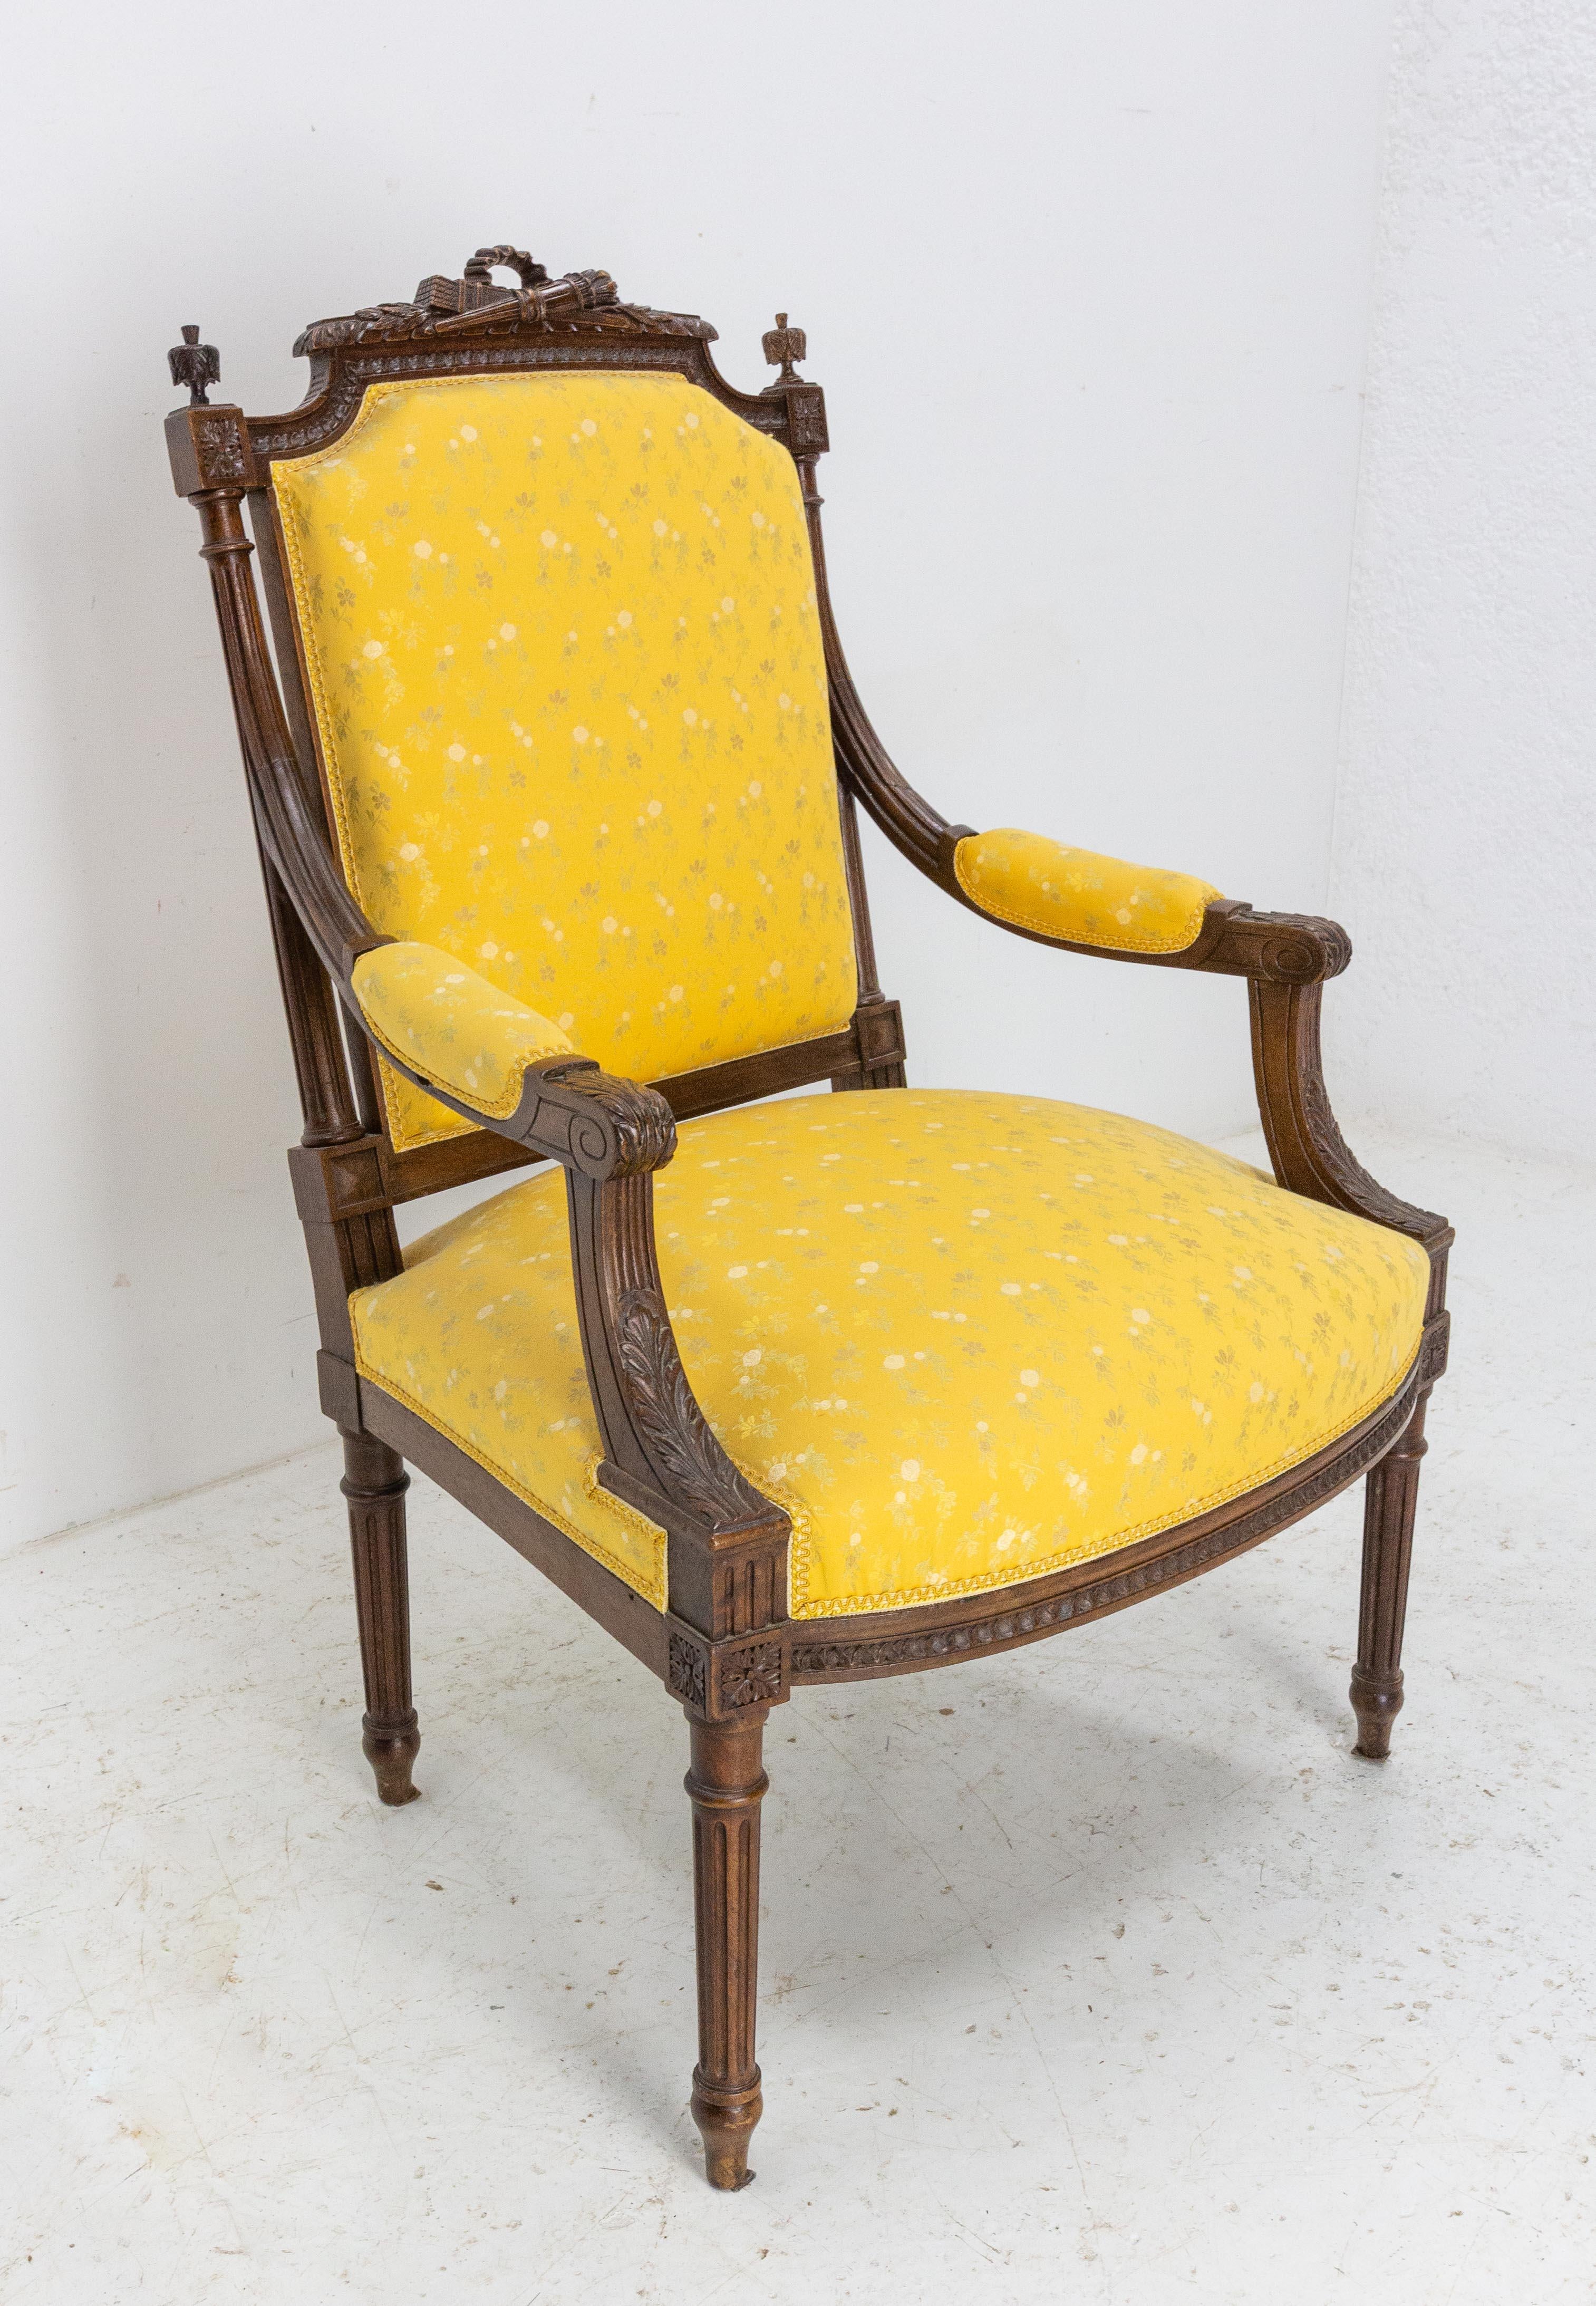 Fabric Walnut Fauteuil Louis XVI Revival Armchair French, Late 19th Century to Recover For Sale